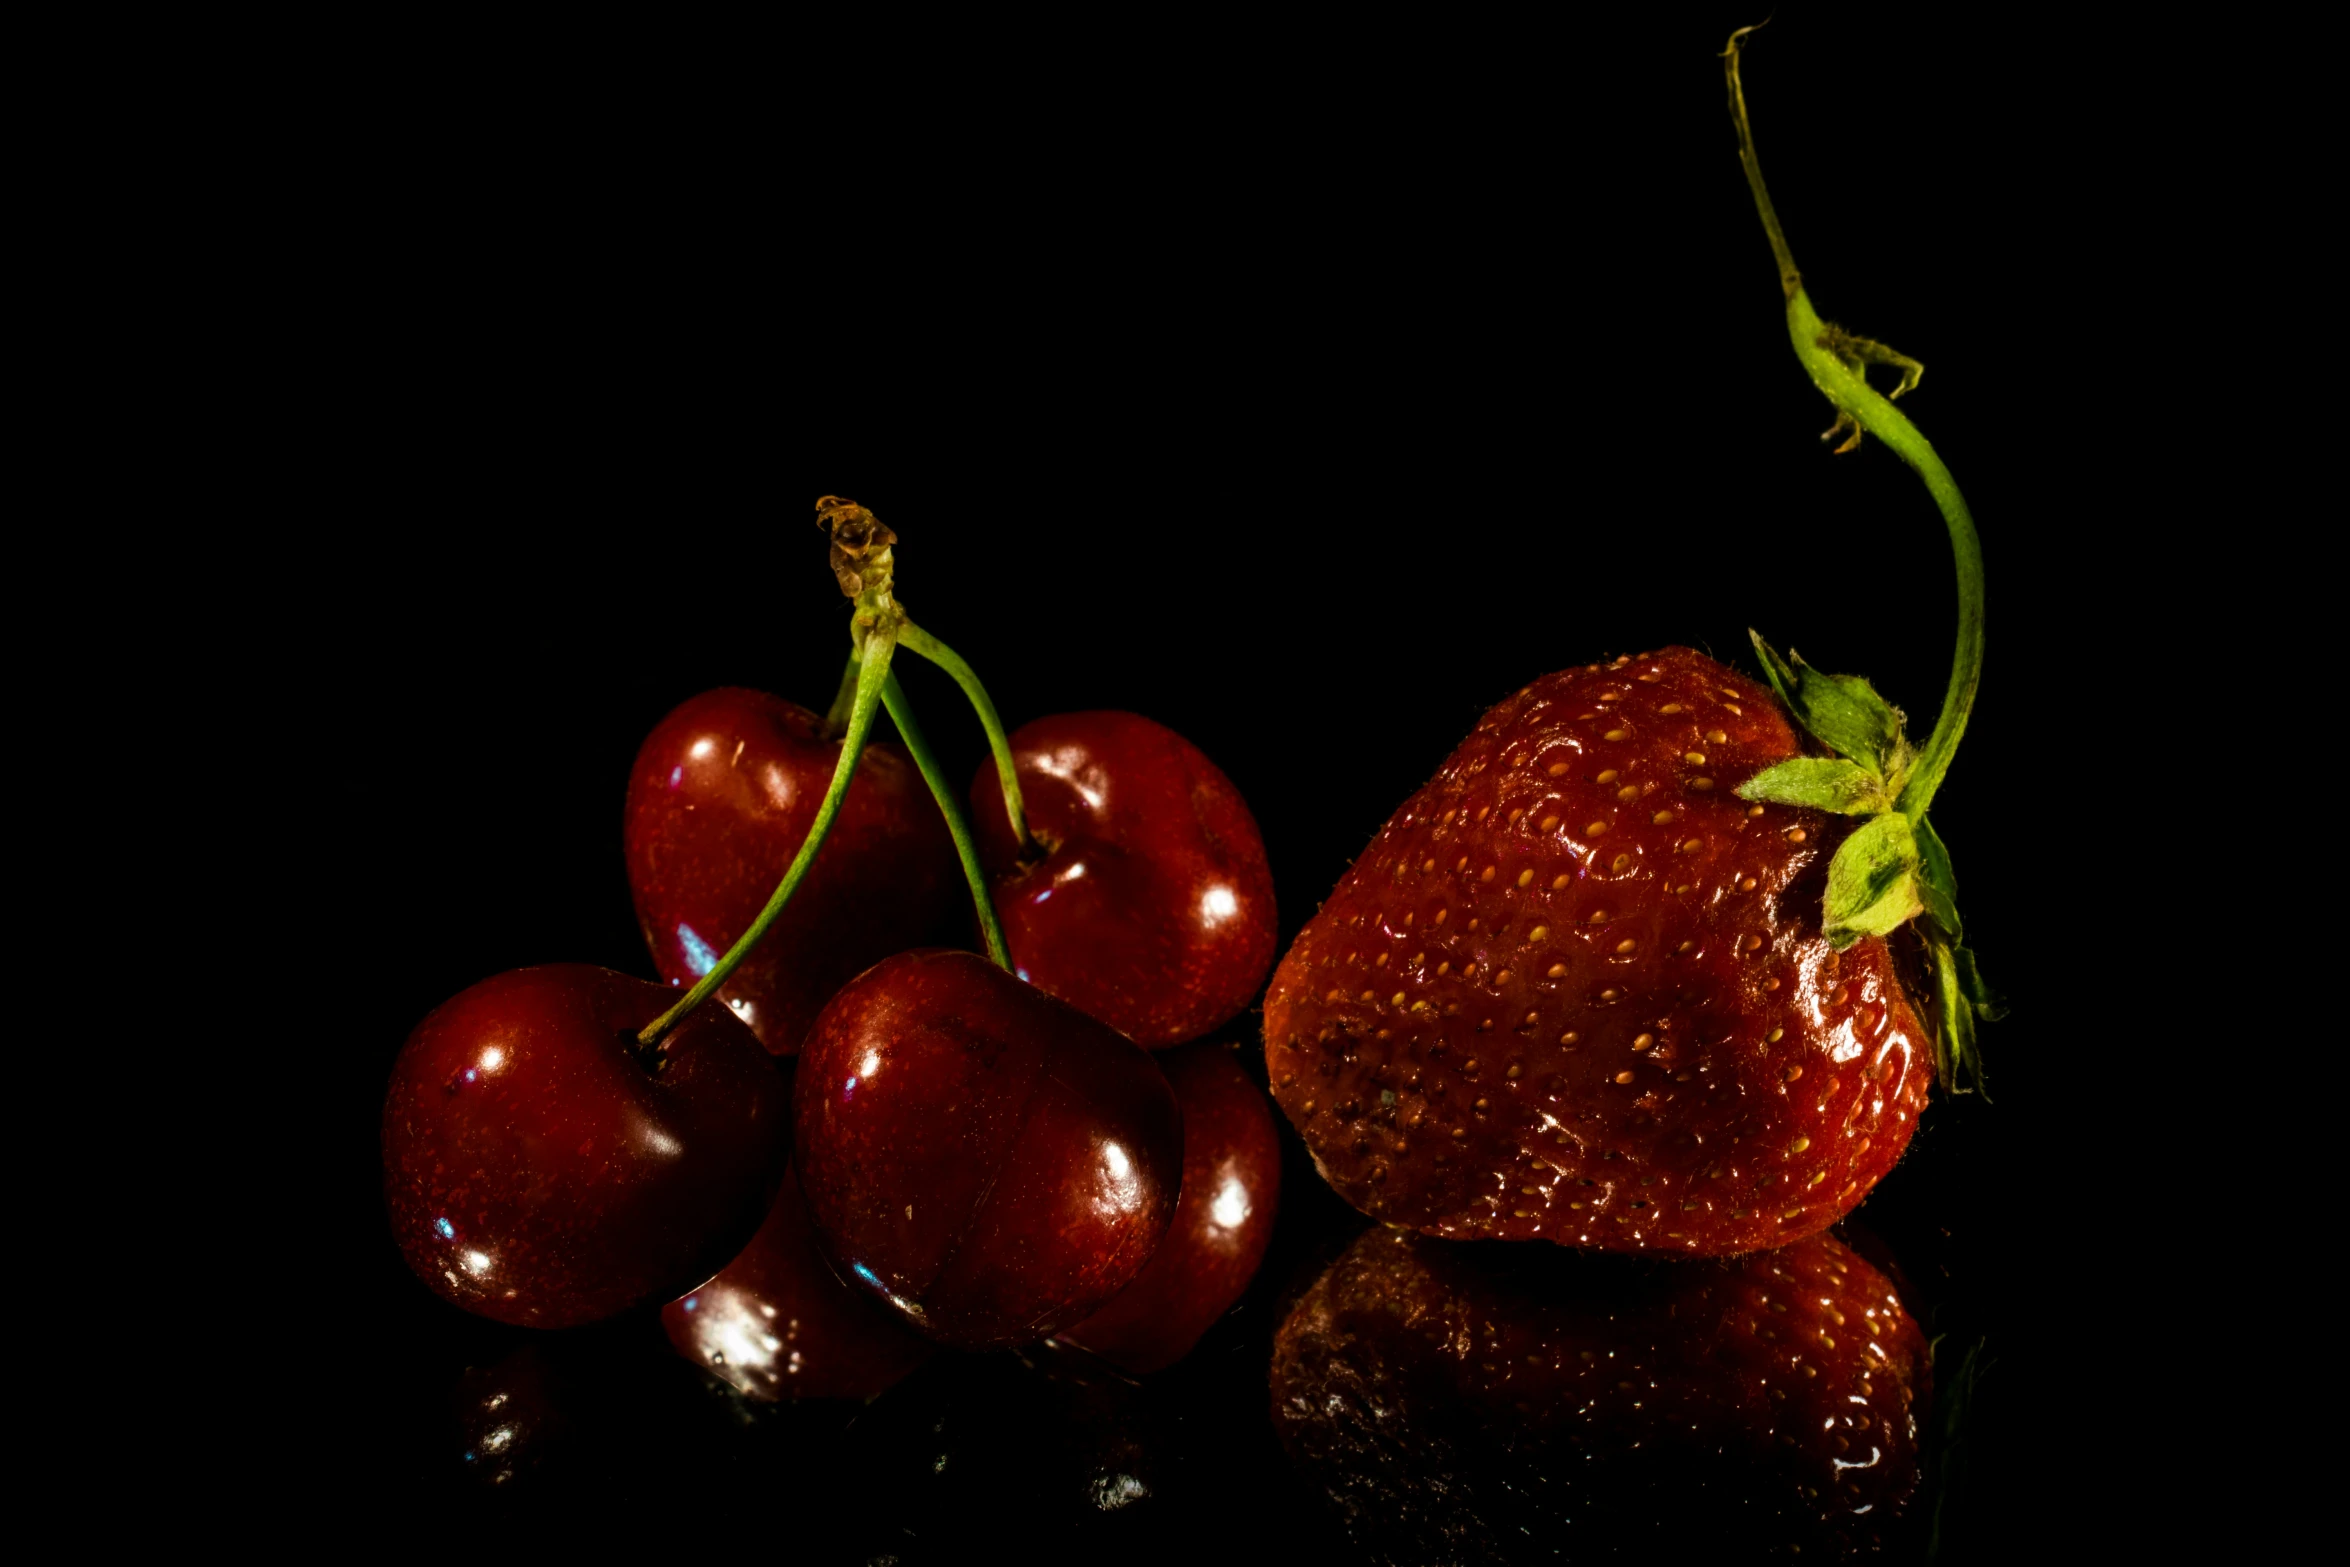 some red fruit and a single strawberry on a black surface